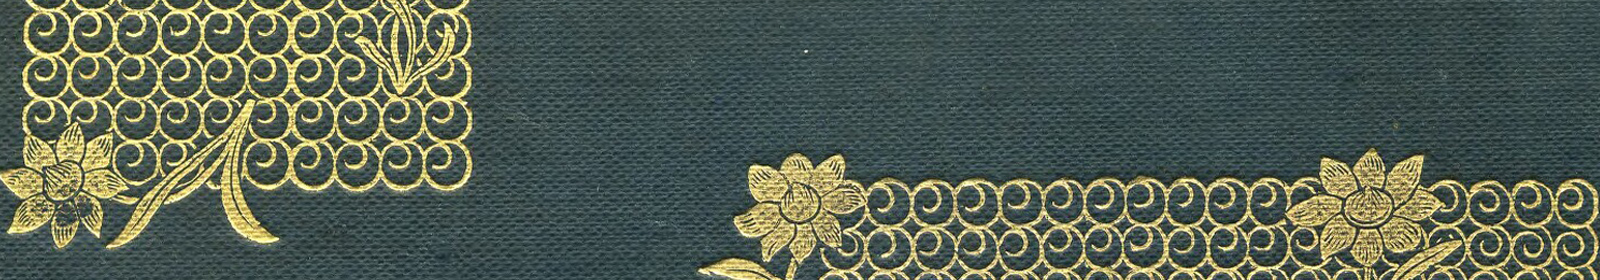 A gold floral design on a deep blue book cover